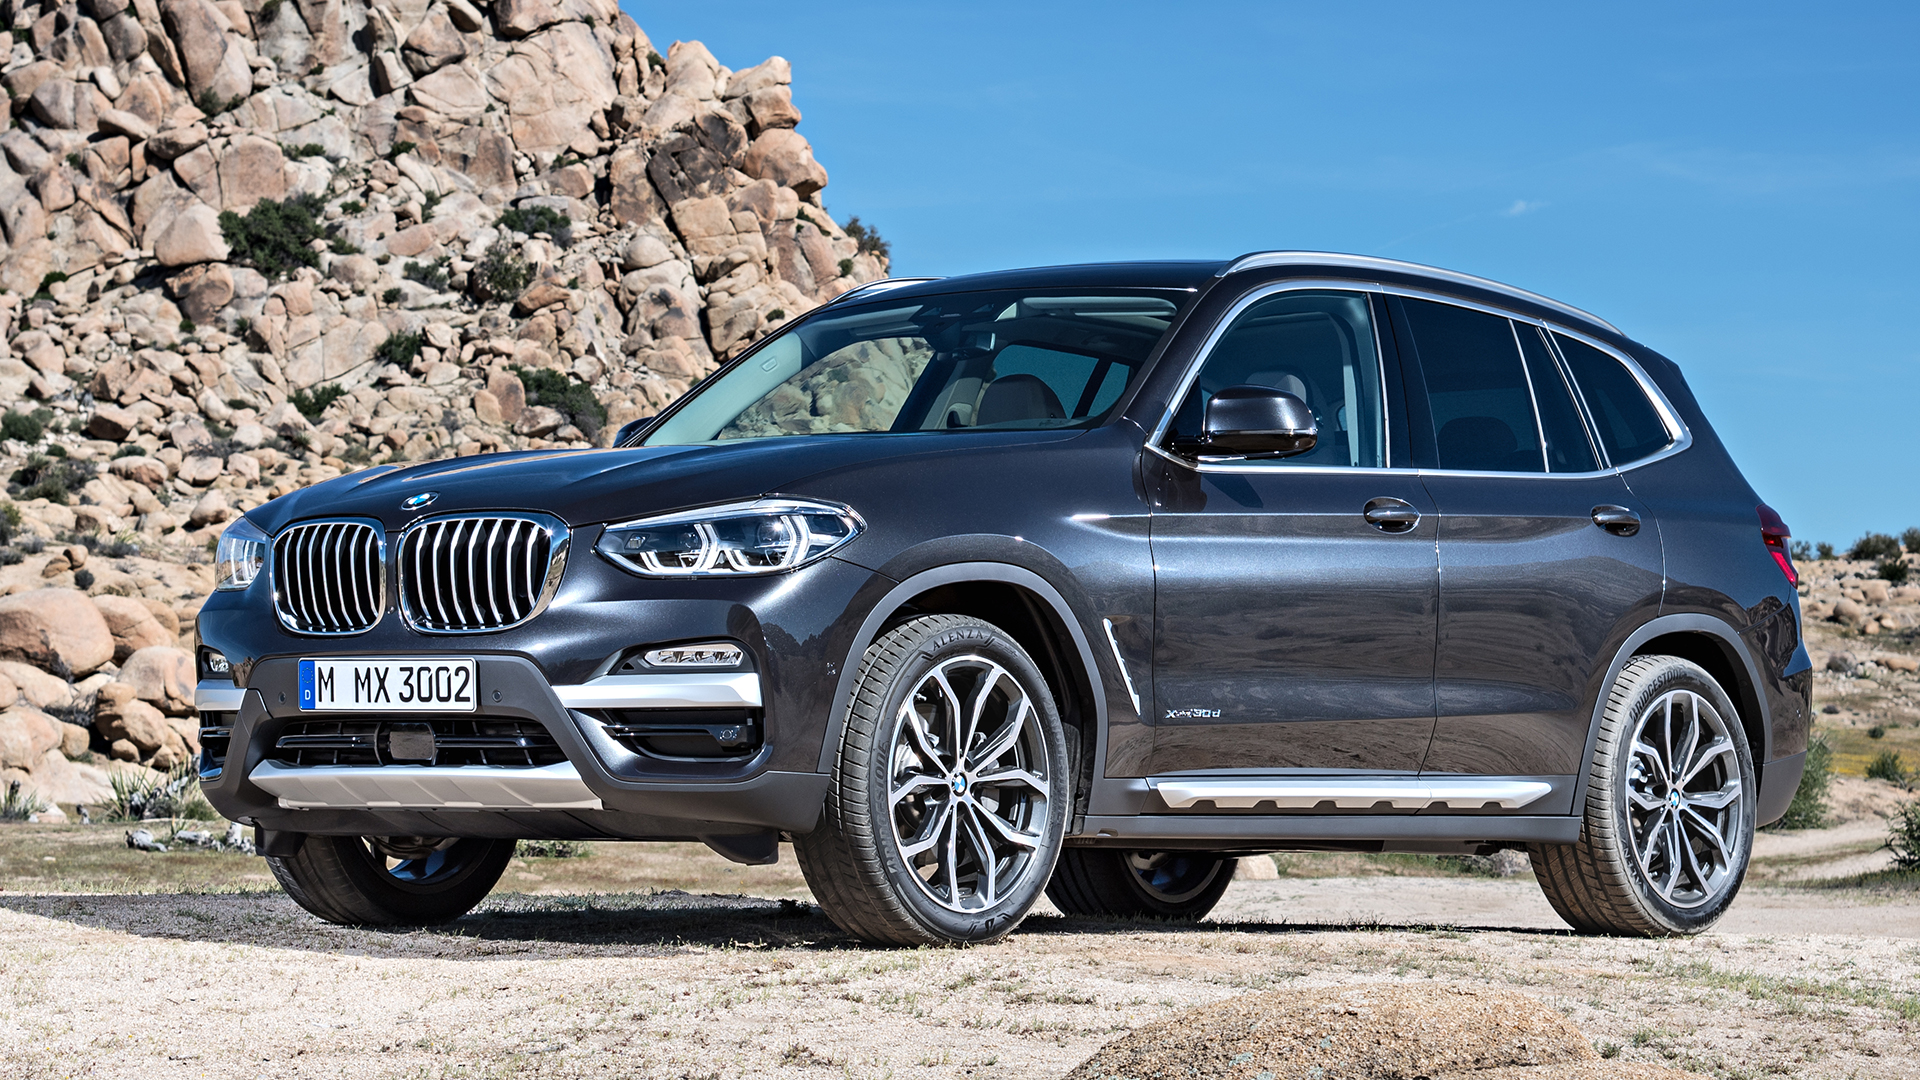 Bmw X3 Series Price In India